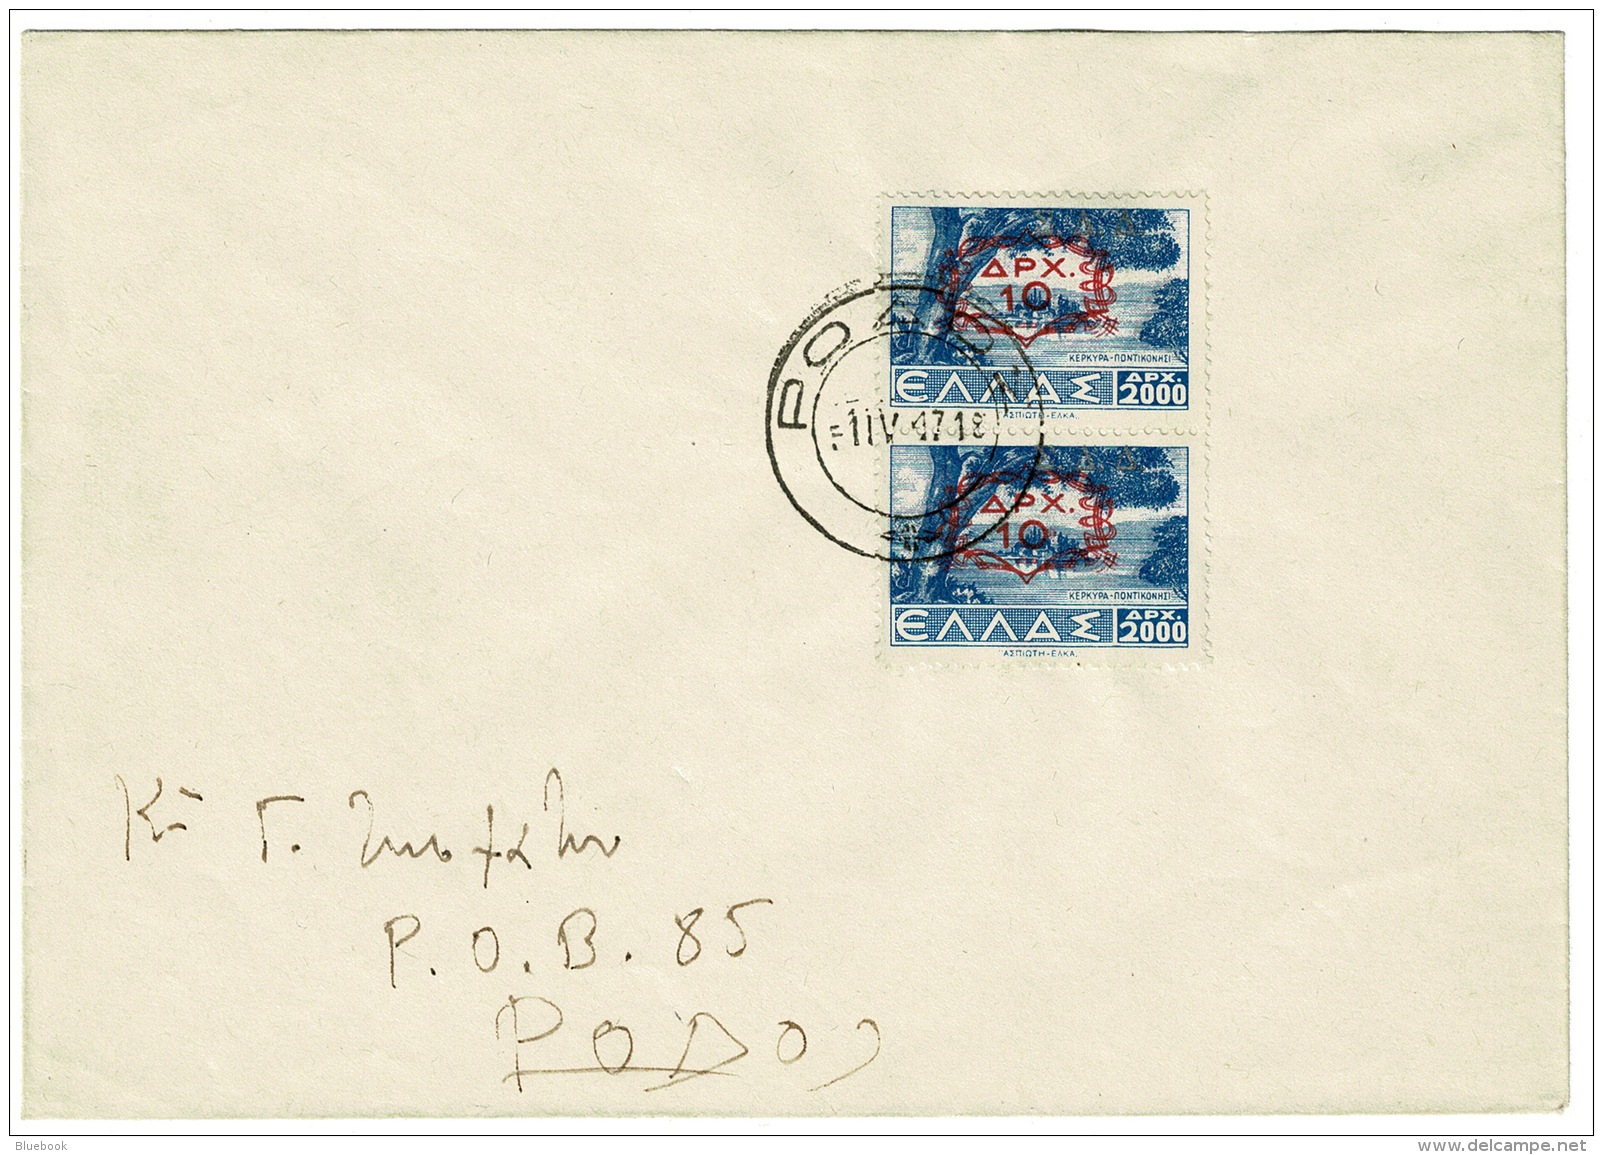 RB 1204 - Super 1947 Rhodes Cover With 2 X Silver Overprints - Greece Aegean Dodecanese - Dodecanese